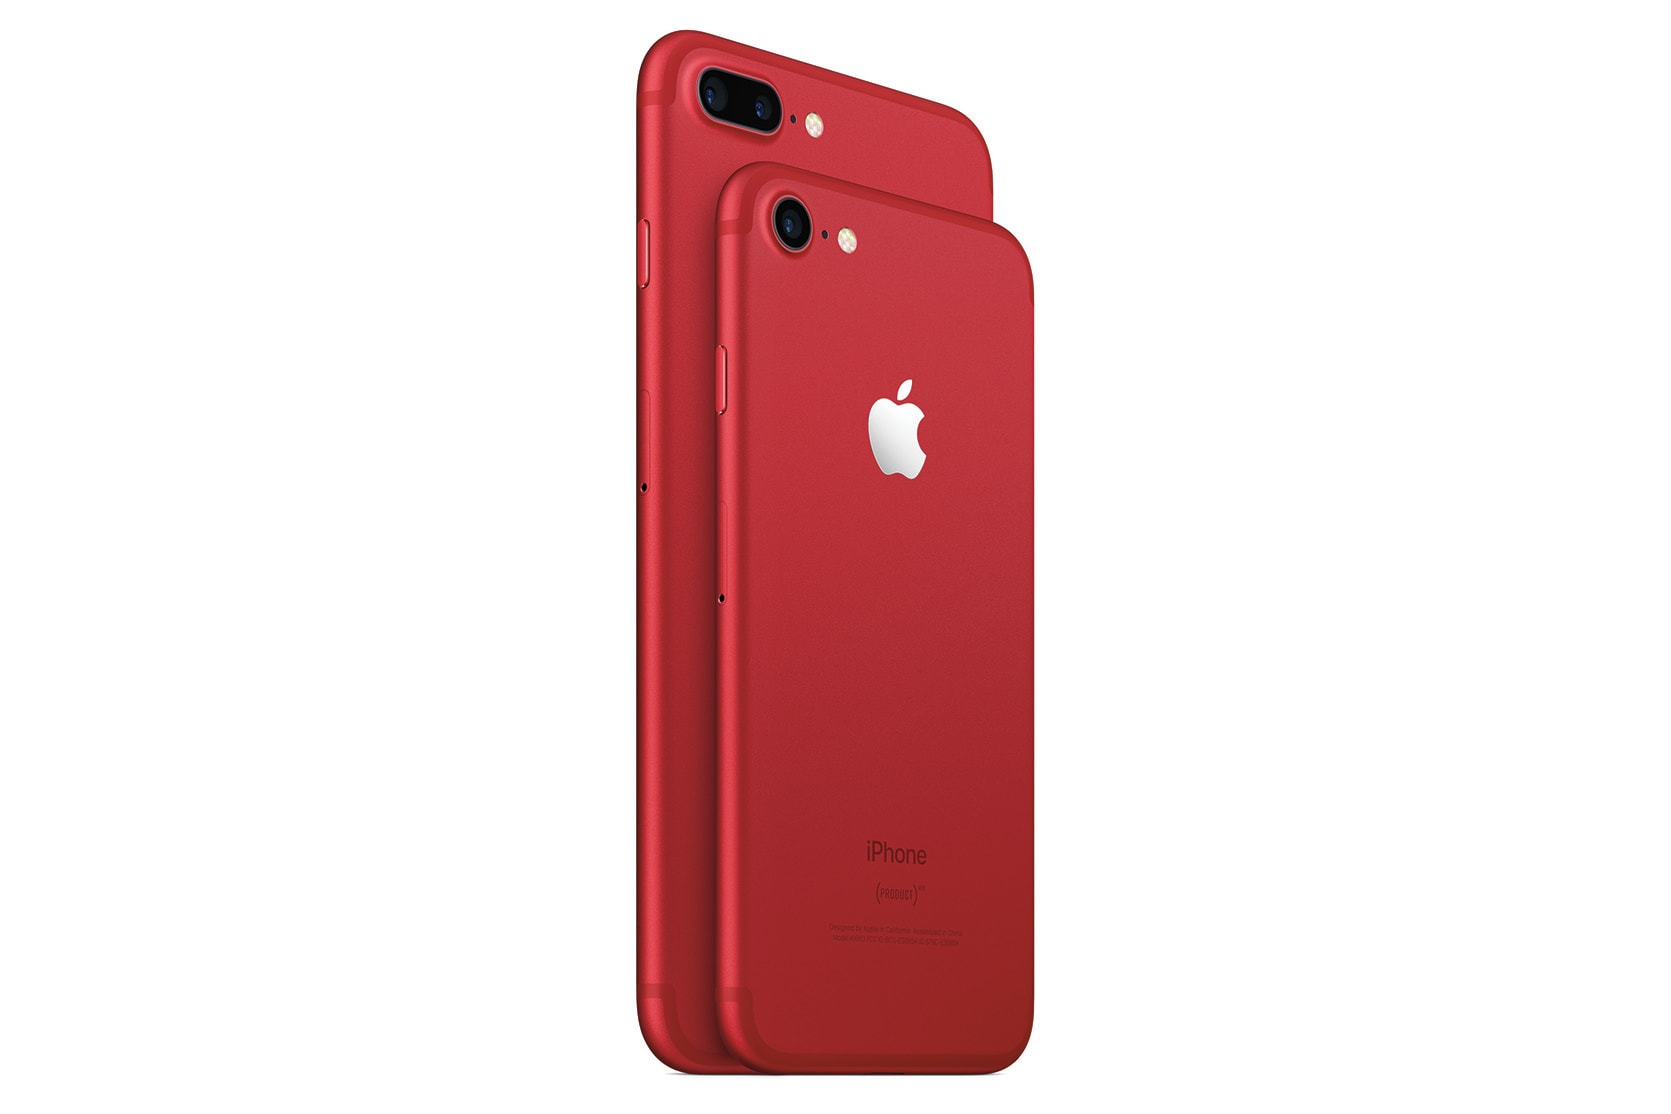 Apple iPhone 8 Red Announcement Rumor iPhone Plus Virgin Mobile Monday April 9 For Sale Purchase Availability Smart Phone